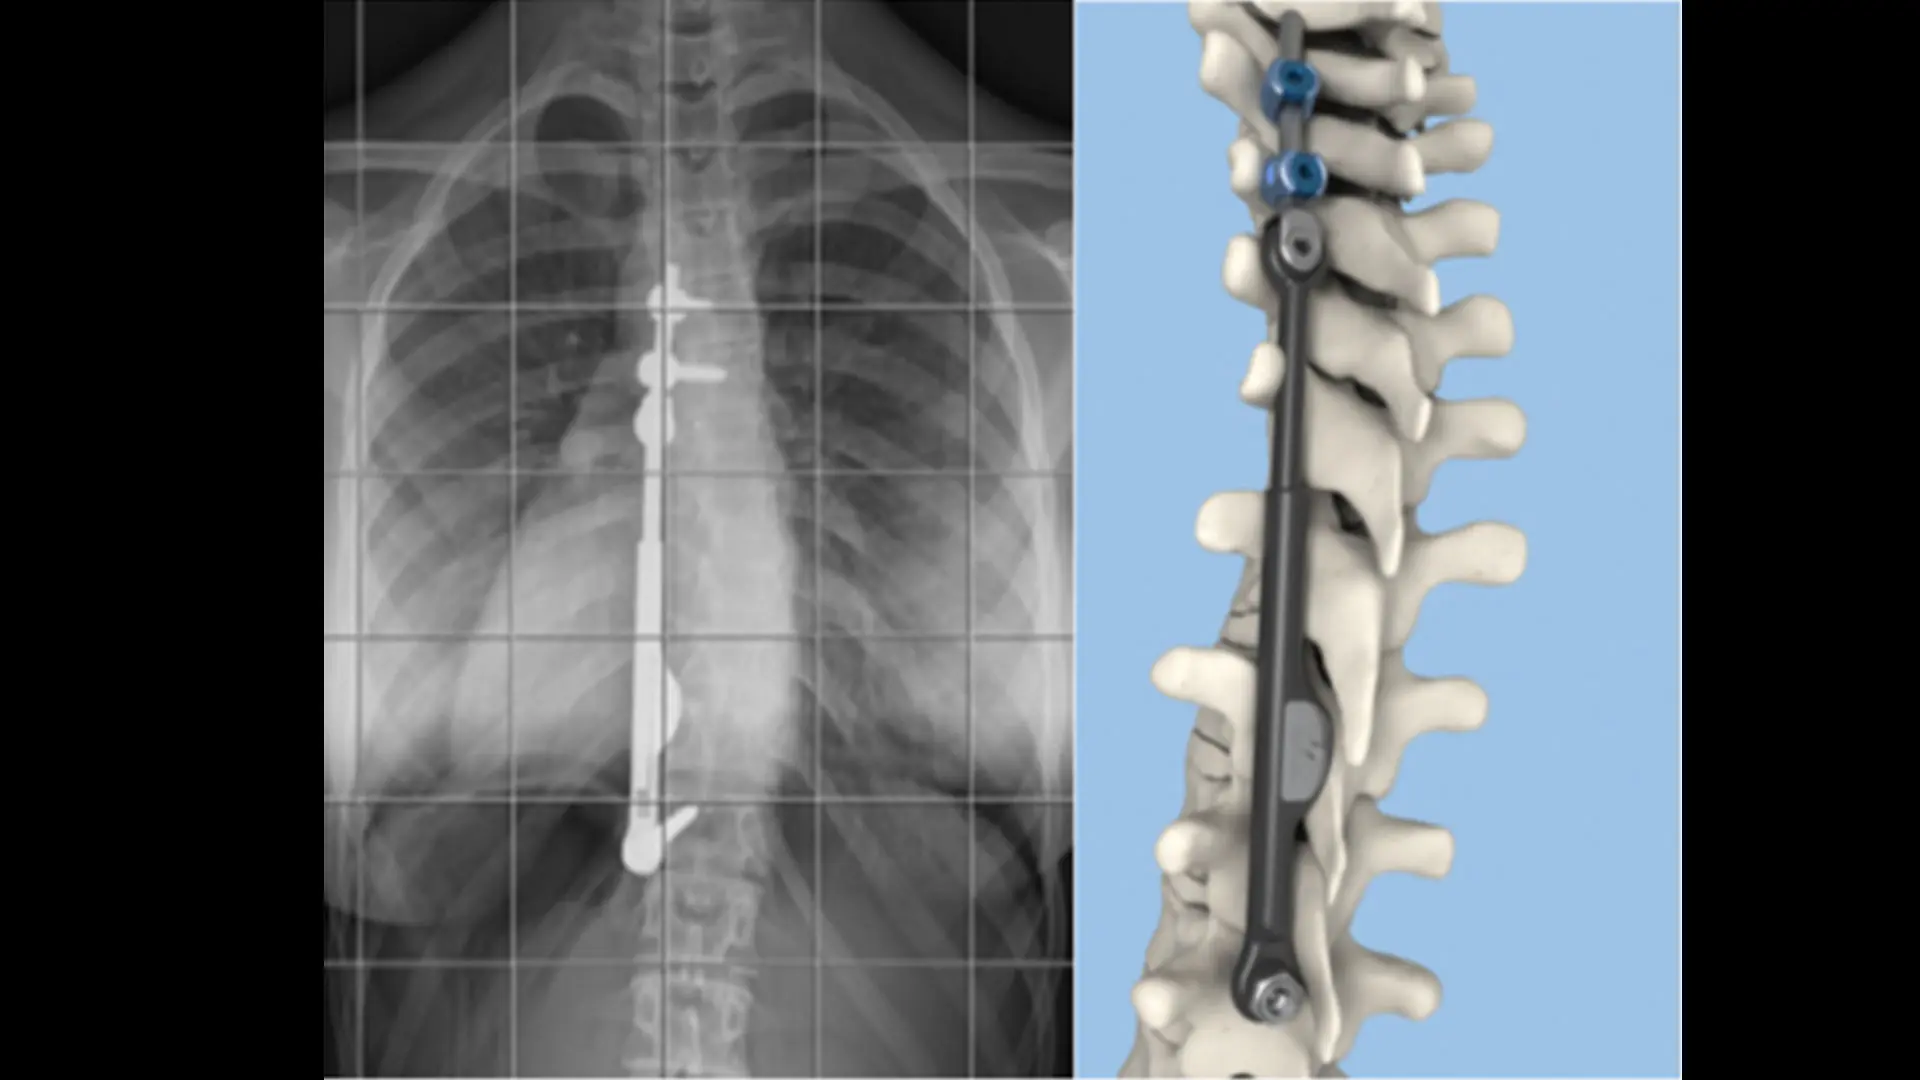 The ApiFix System is implanted via a posterior or back approach and maintains a good deal of patient's natural flexibility through a self-adjusting rod mechanism that allows for additional post-operative correction. 